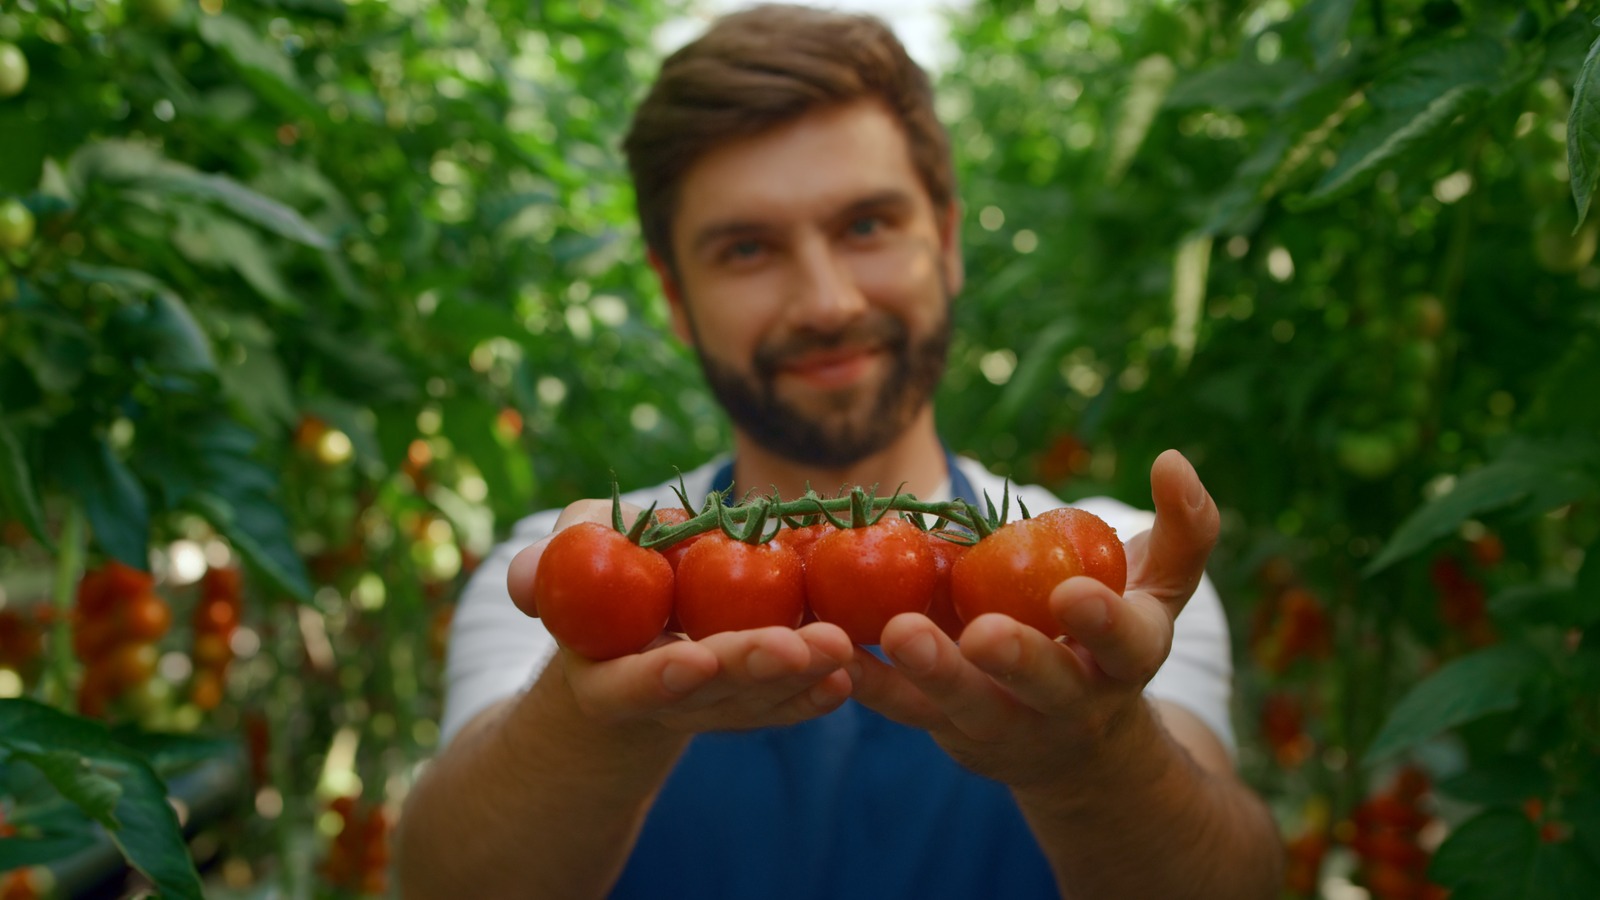 Tomatoes Have An Important Health Benefit For Men